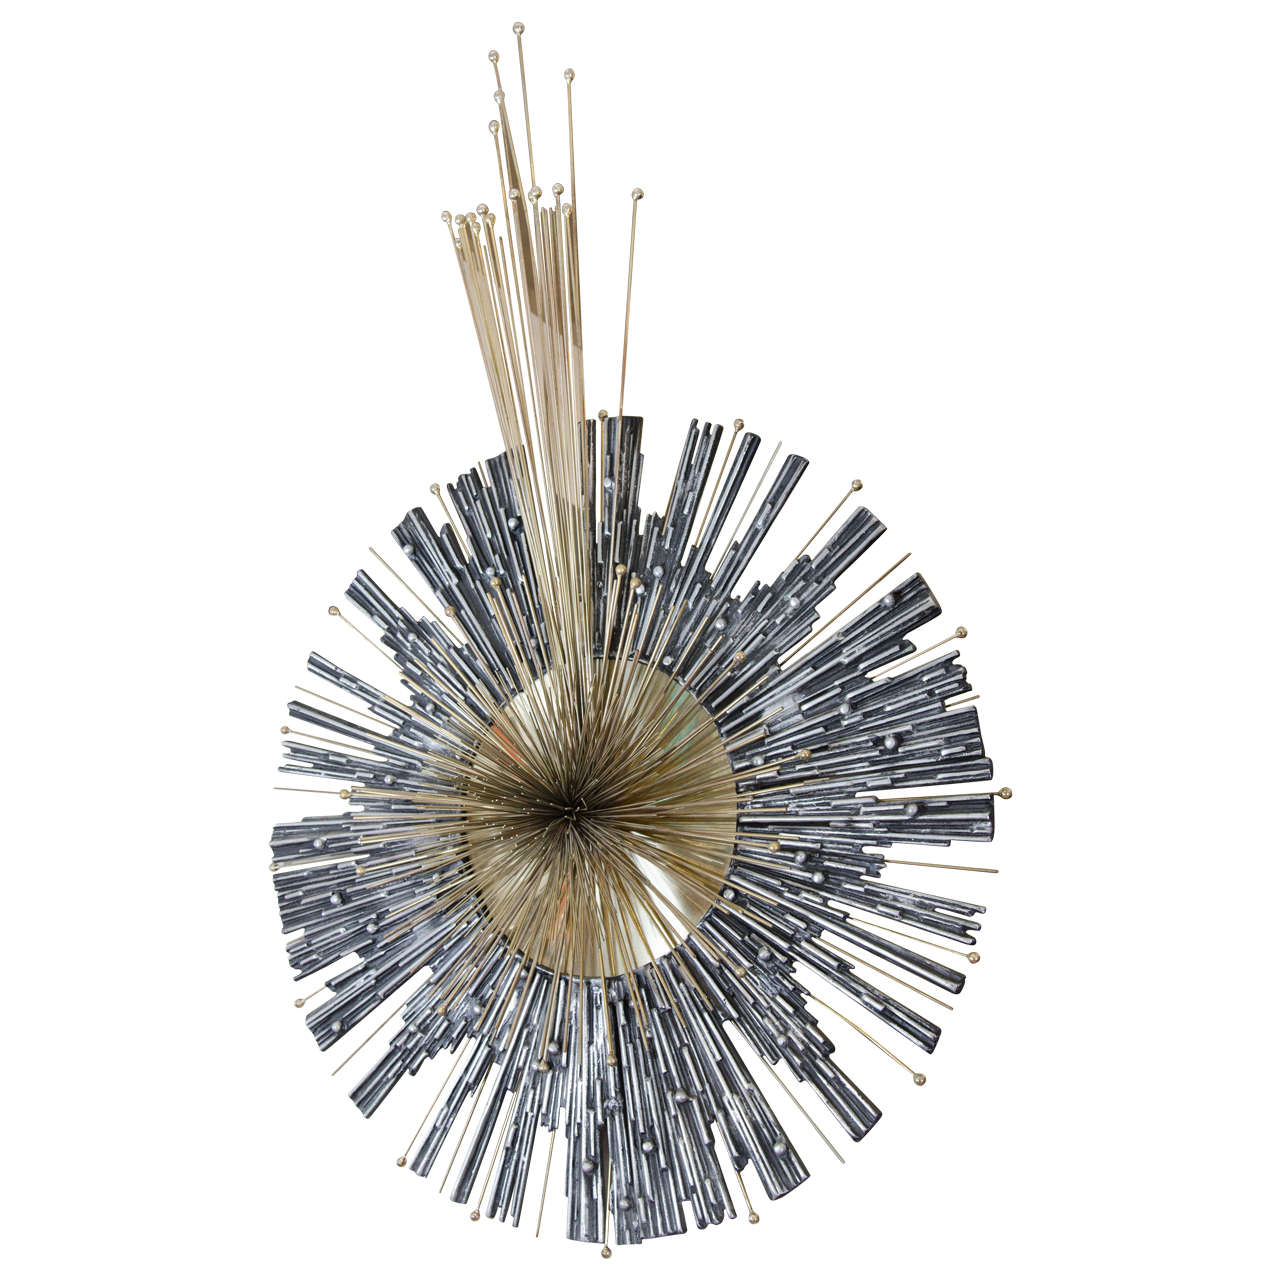 Brutalist Mixed Metal Sunburst Wall Sculpture Inspired by Curtis Jere